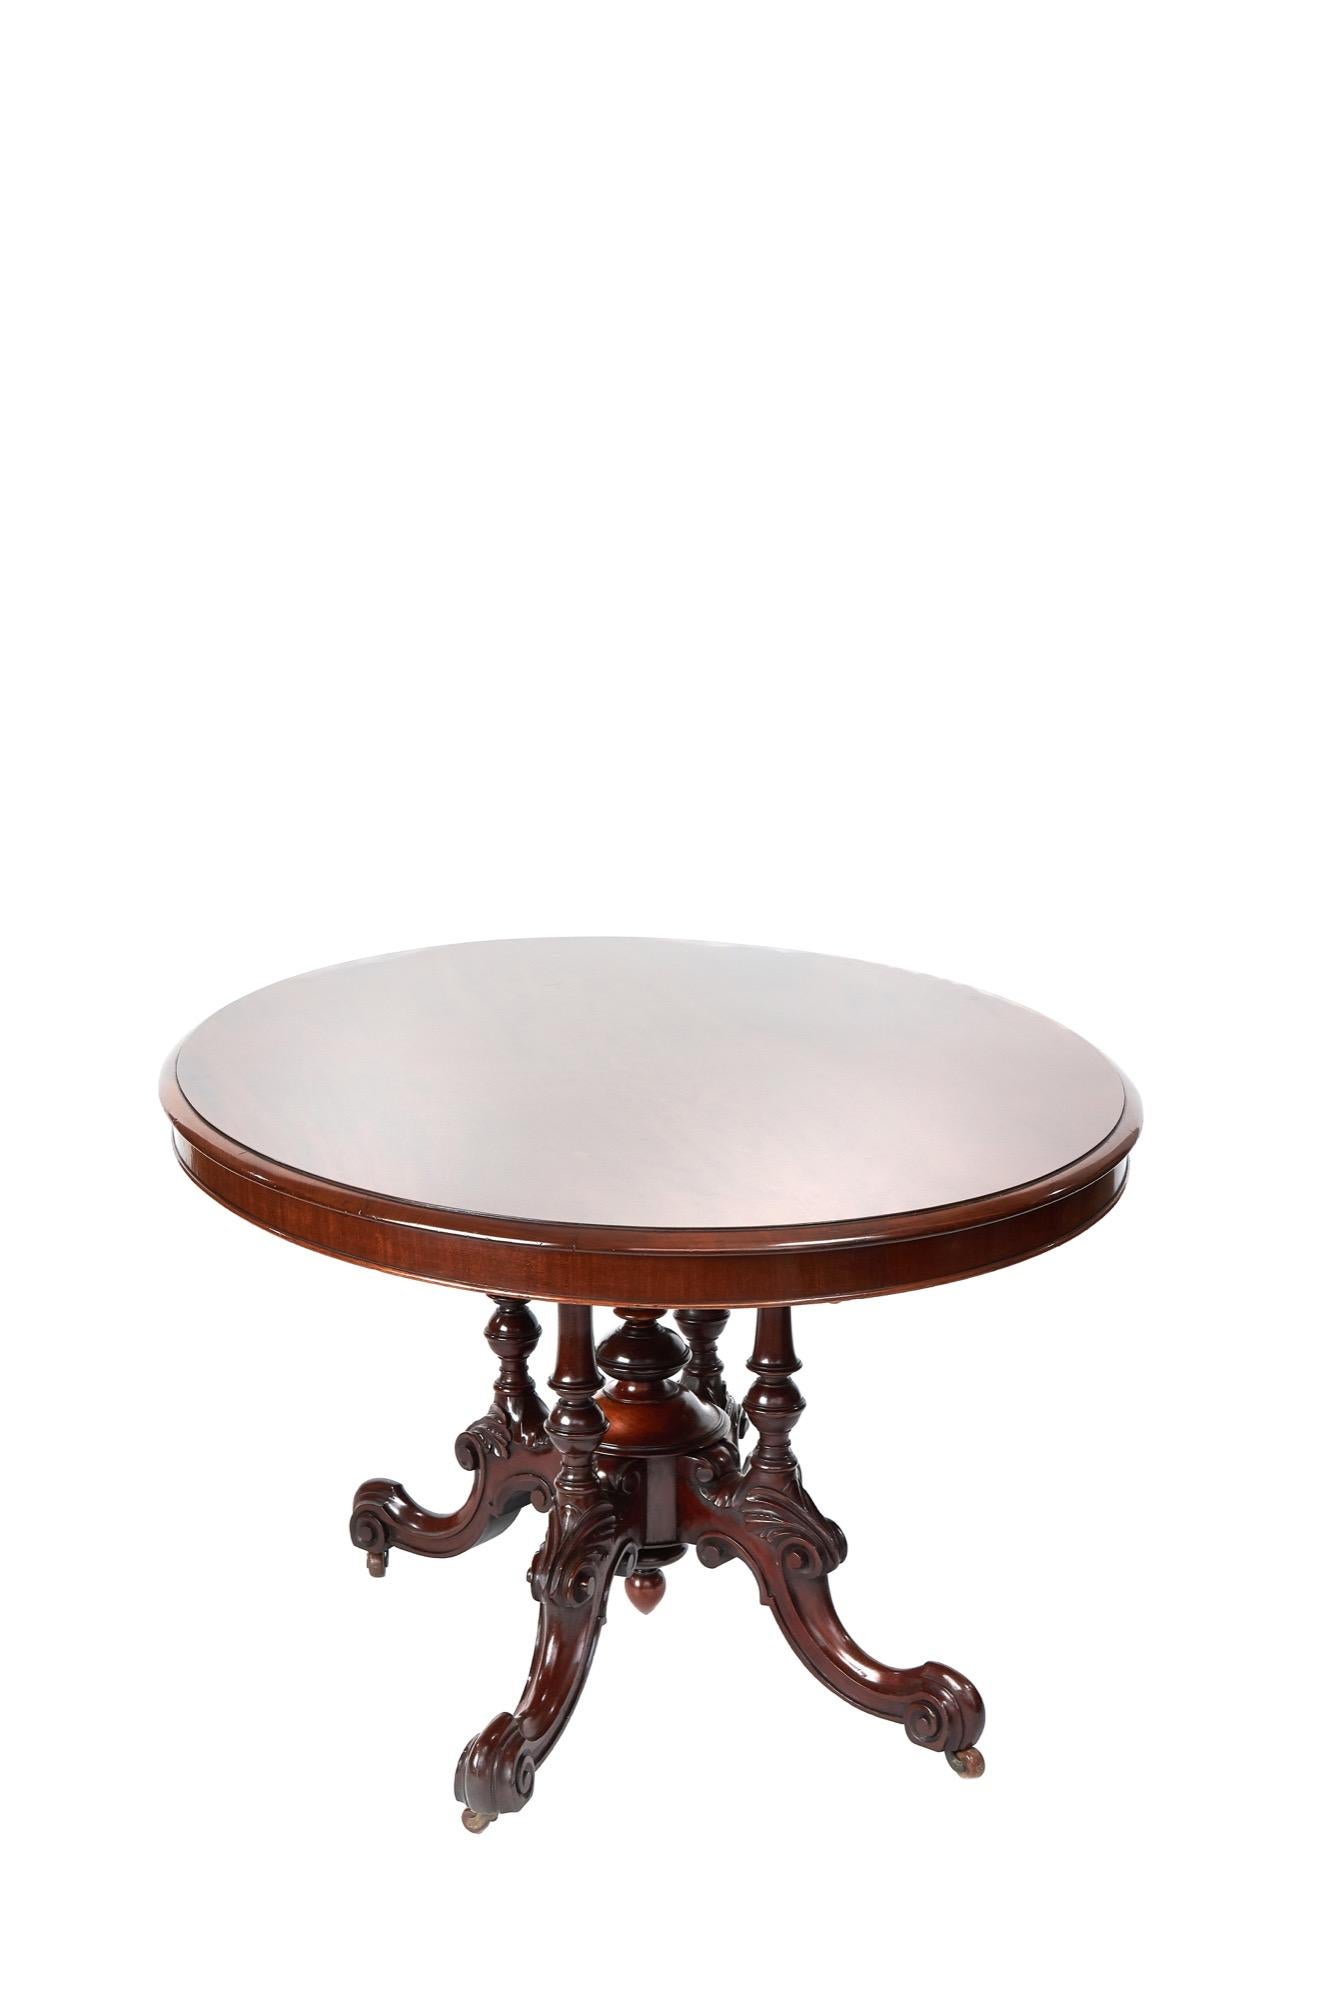 Antique Victorian mahogany centre table with a quadruple turned column base, supported by 4 cabriole legs, centre with turned finials.